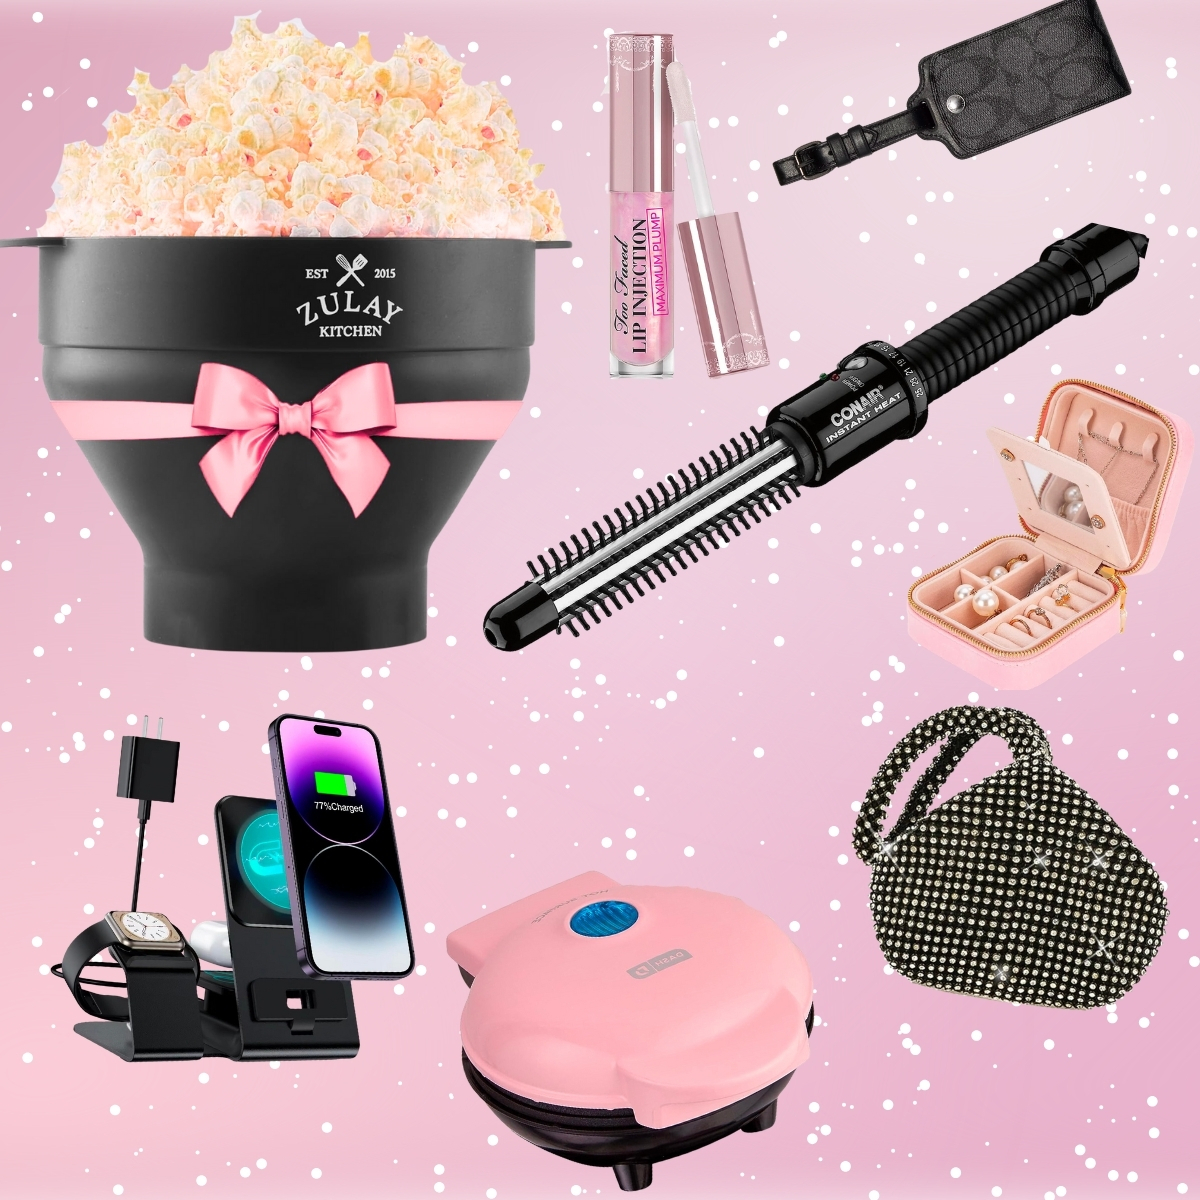 Expensive-Looking Gifts Under 15 Dollars for Girls - HubPages